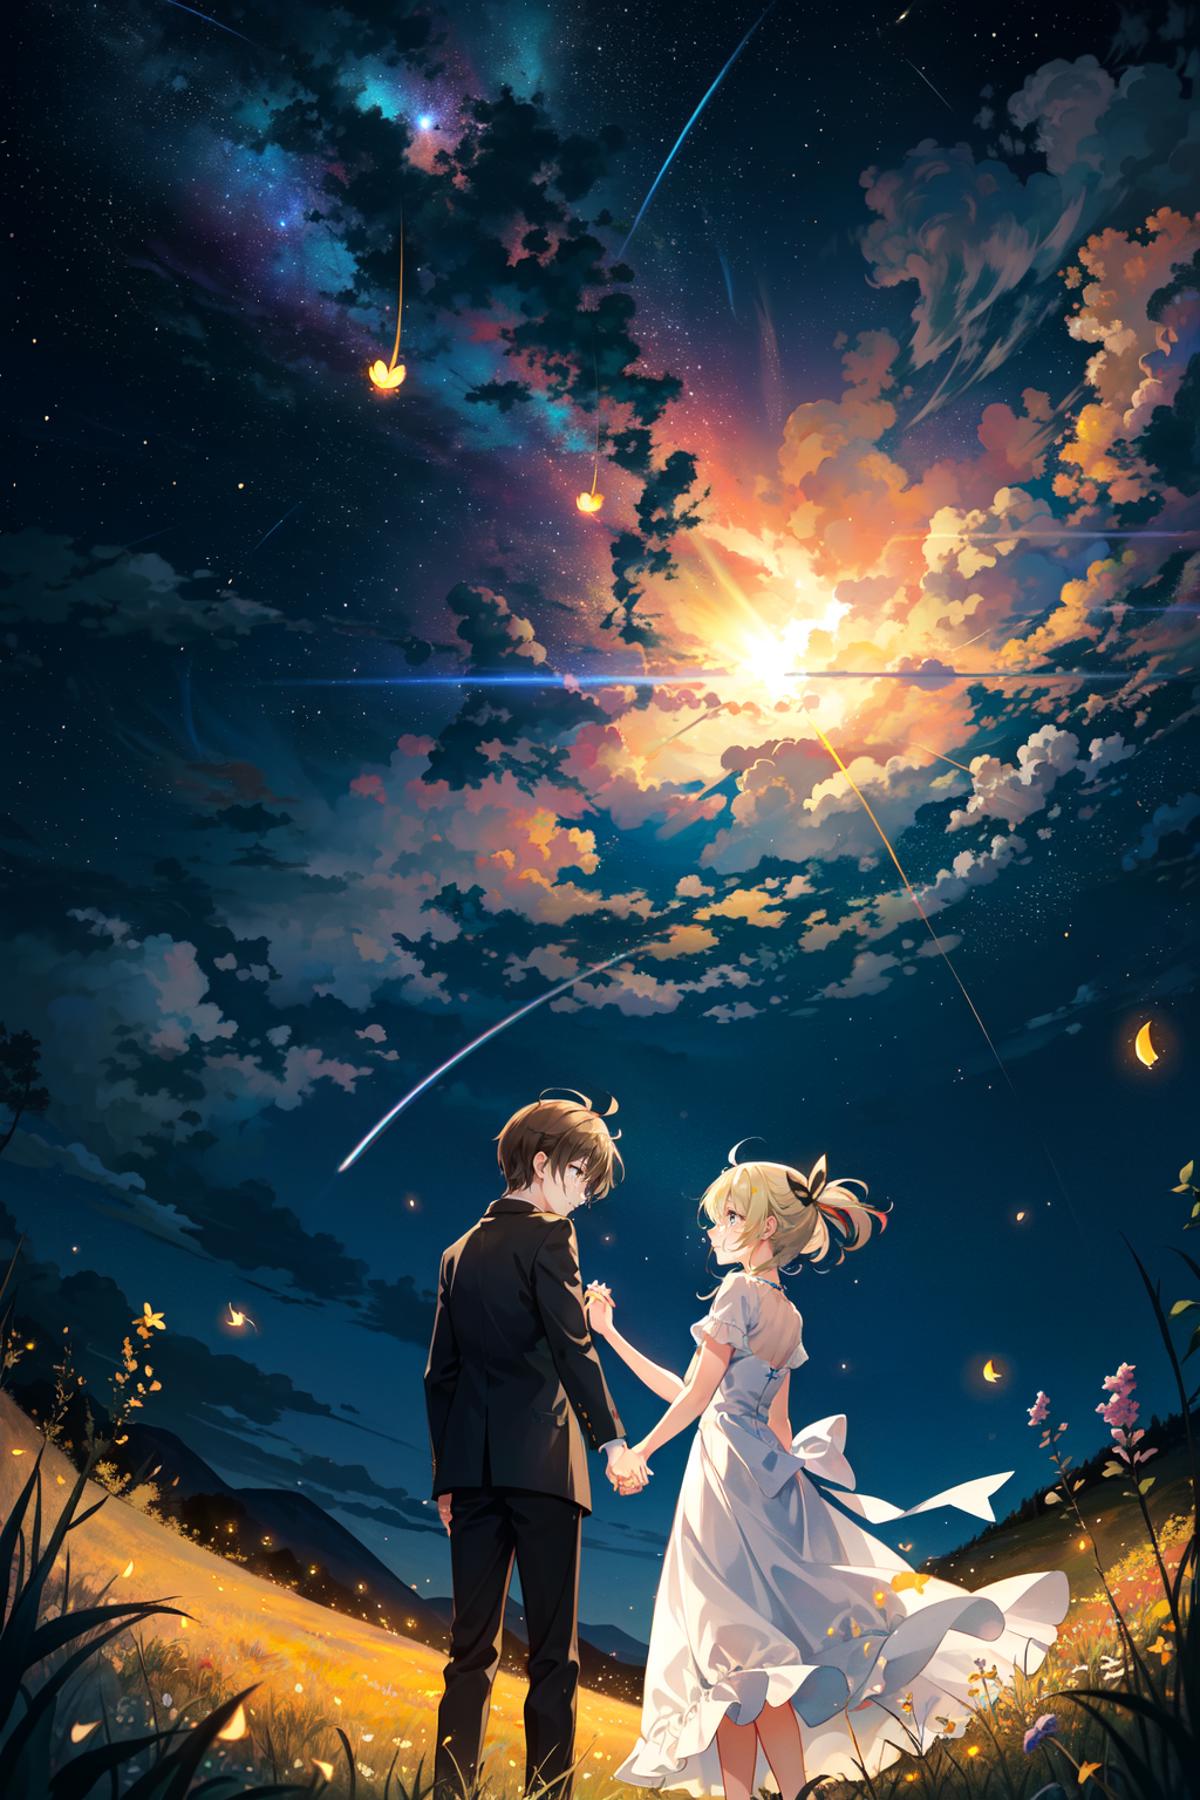 A couple stands together under a starry night sky.